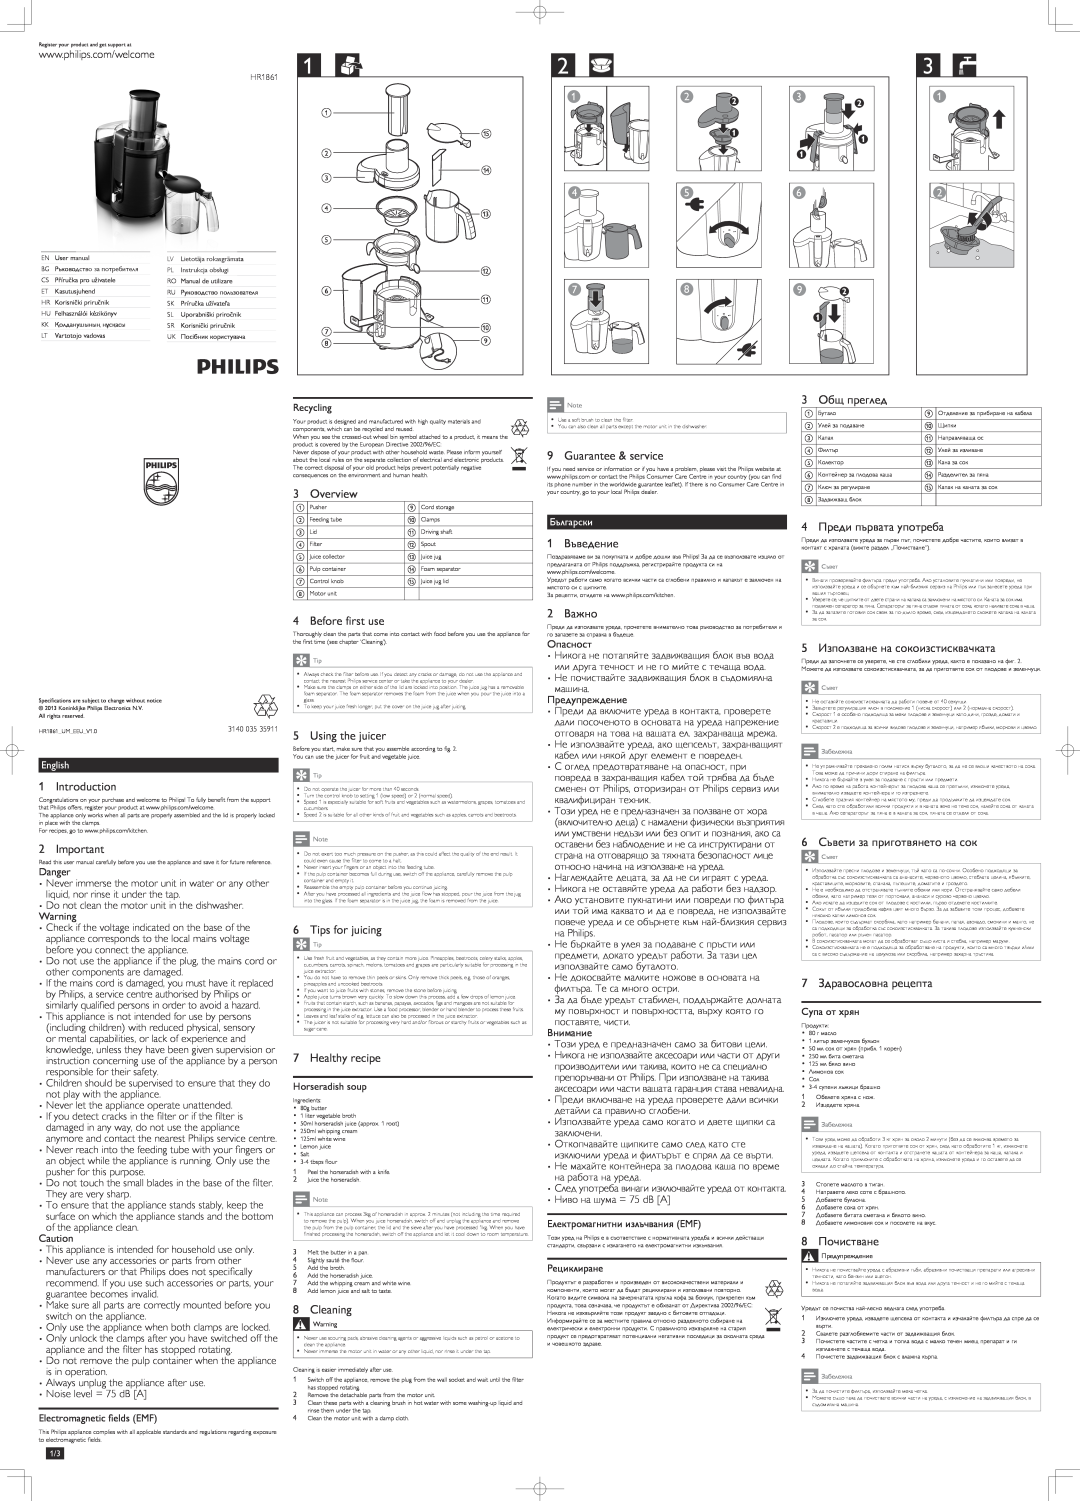 Philips HR1861 specifications Introduction 